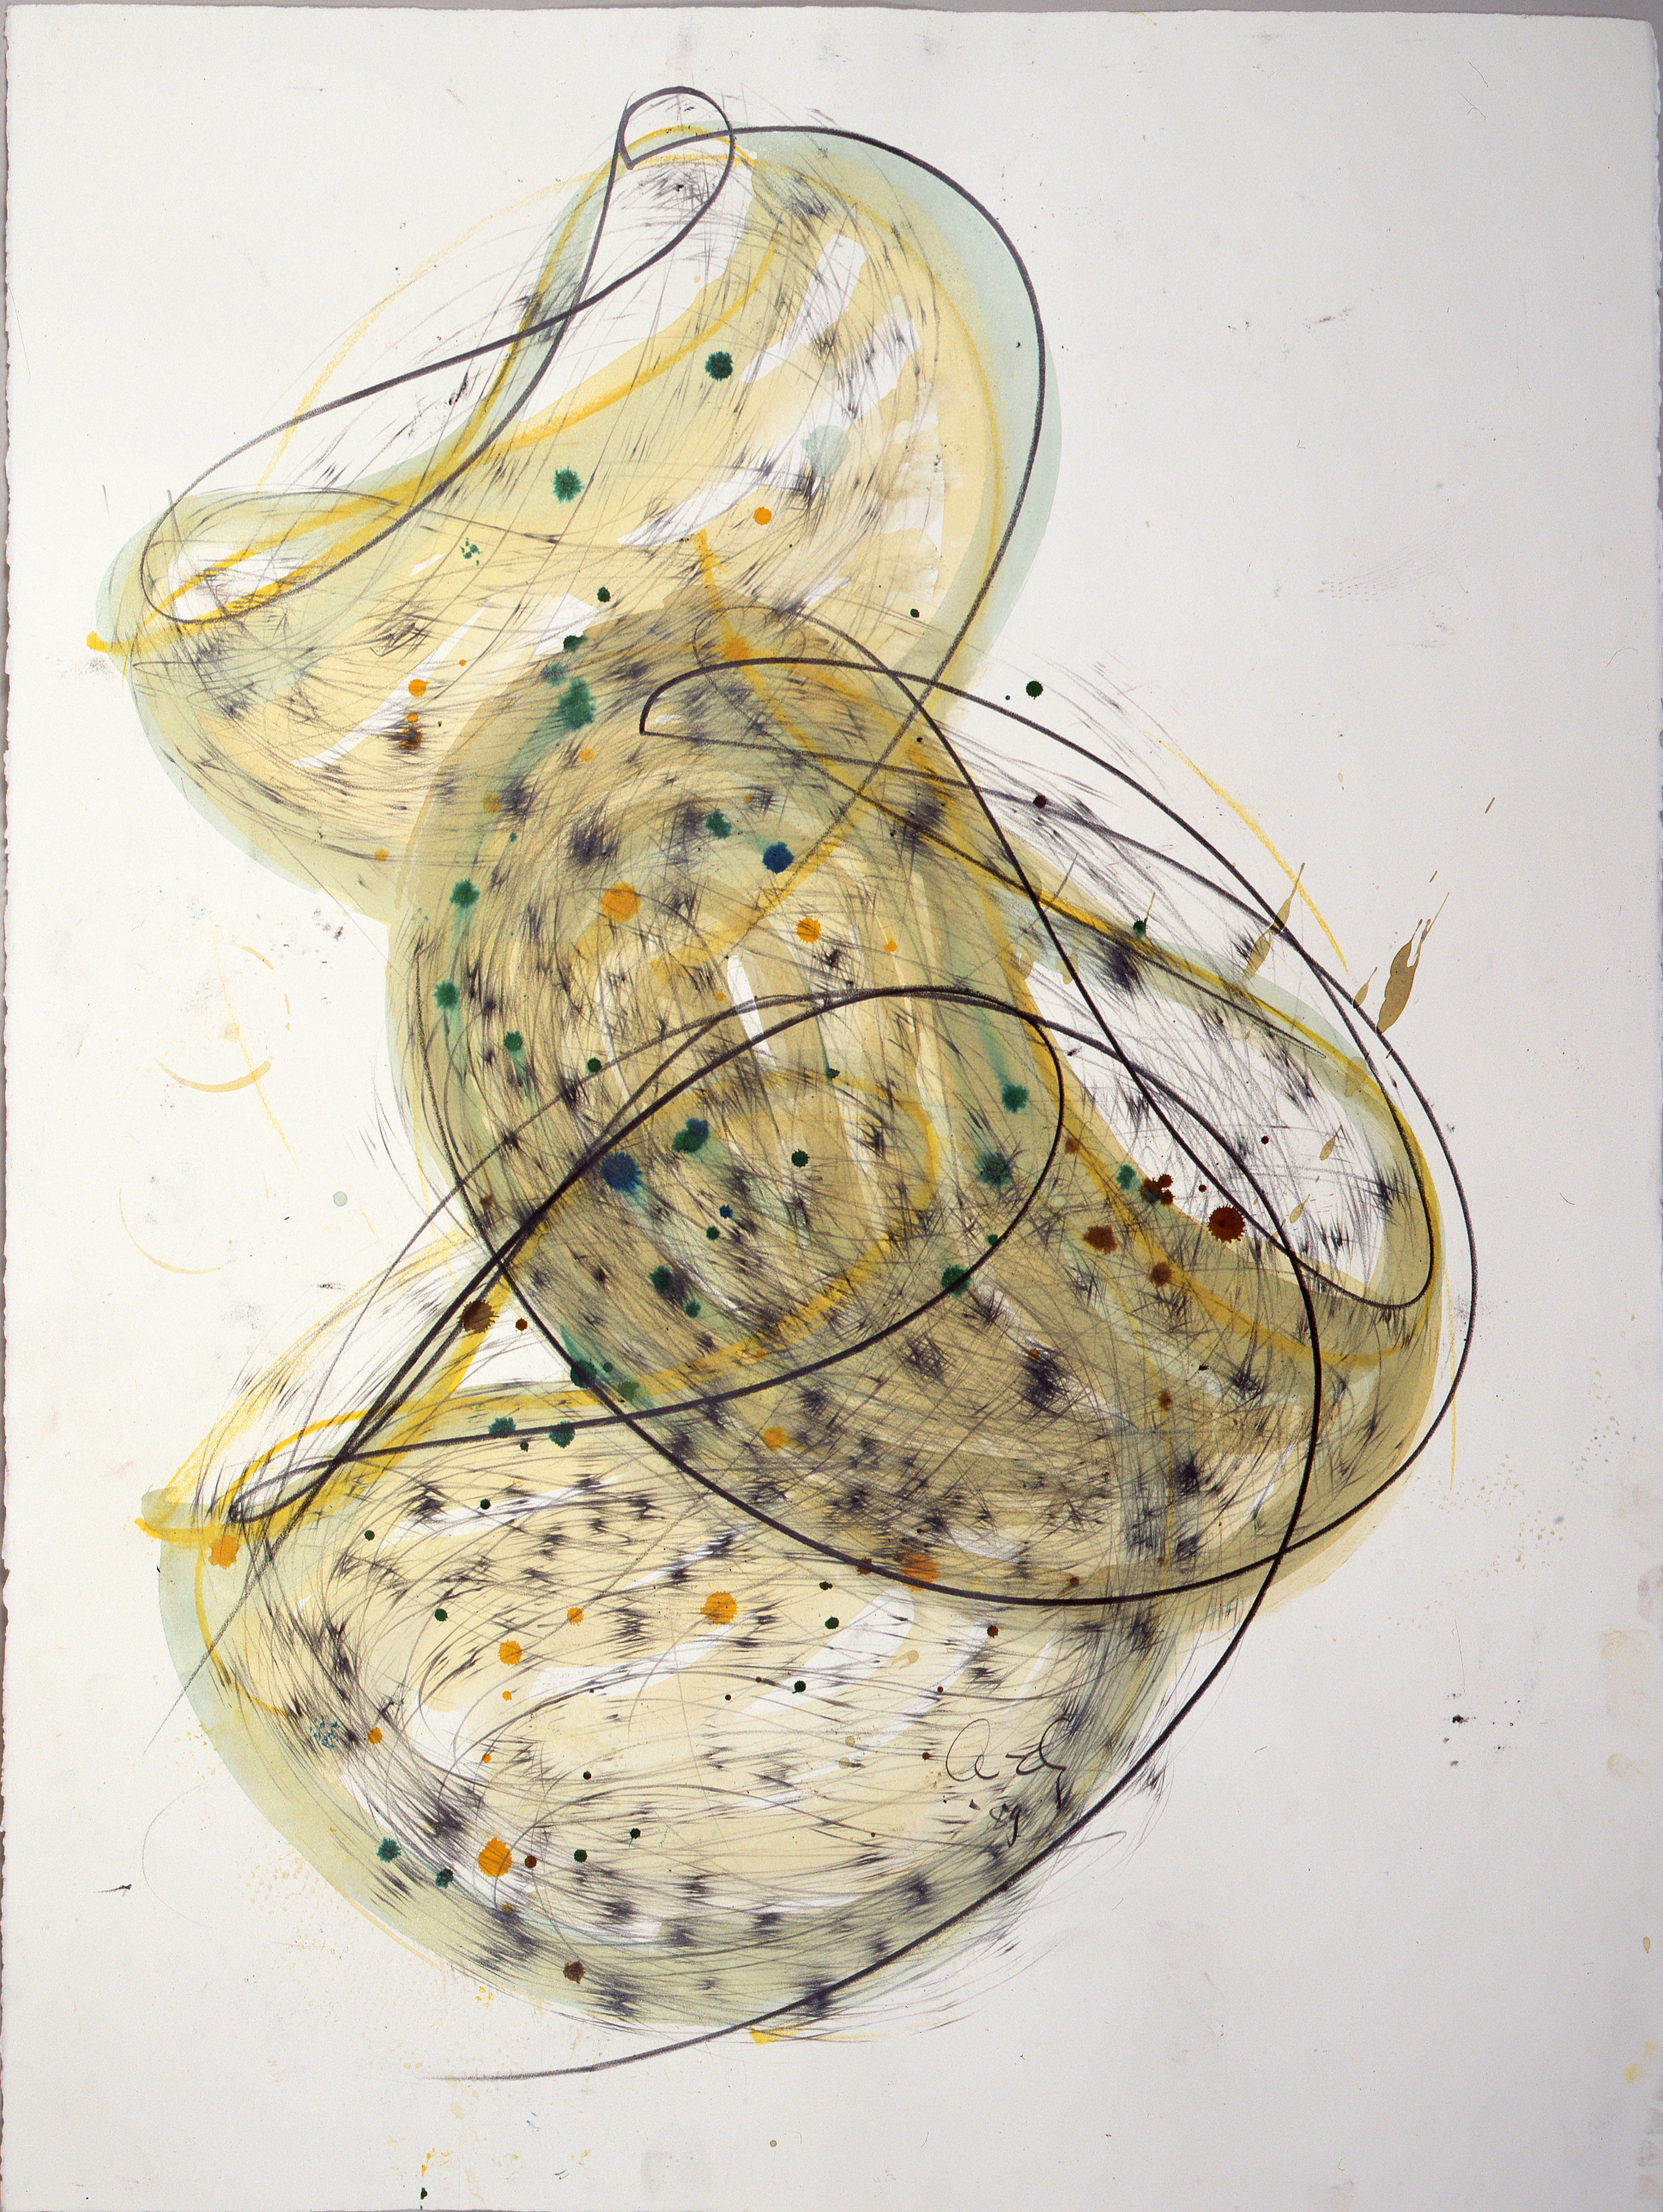  Dale Chihuly,&nbsp; Macchia Drawing #31,&nbsp; (1989, graphite, charcoal, and watercolor on paper, 30 x 22 inches), DC.86 